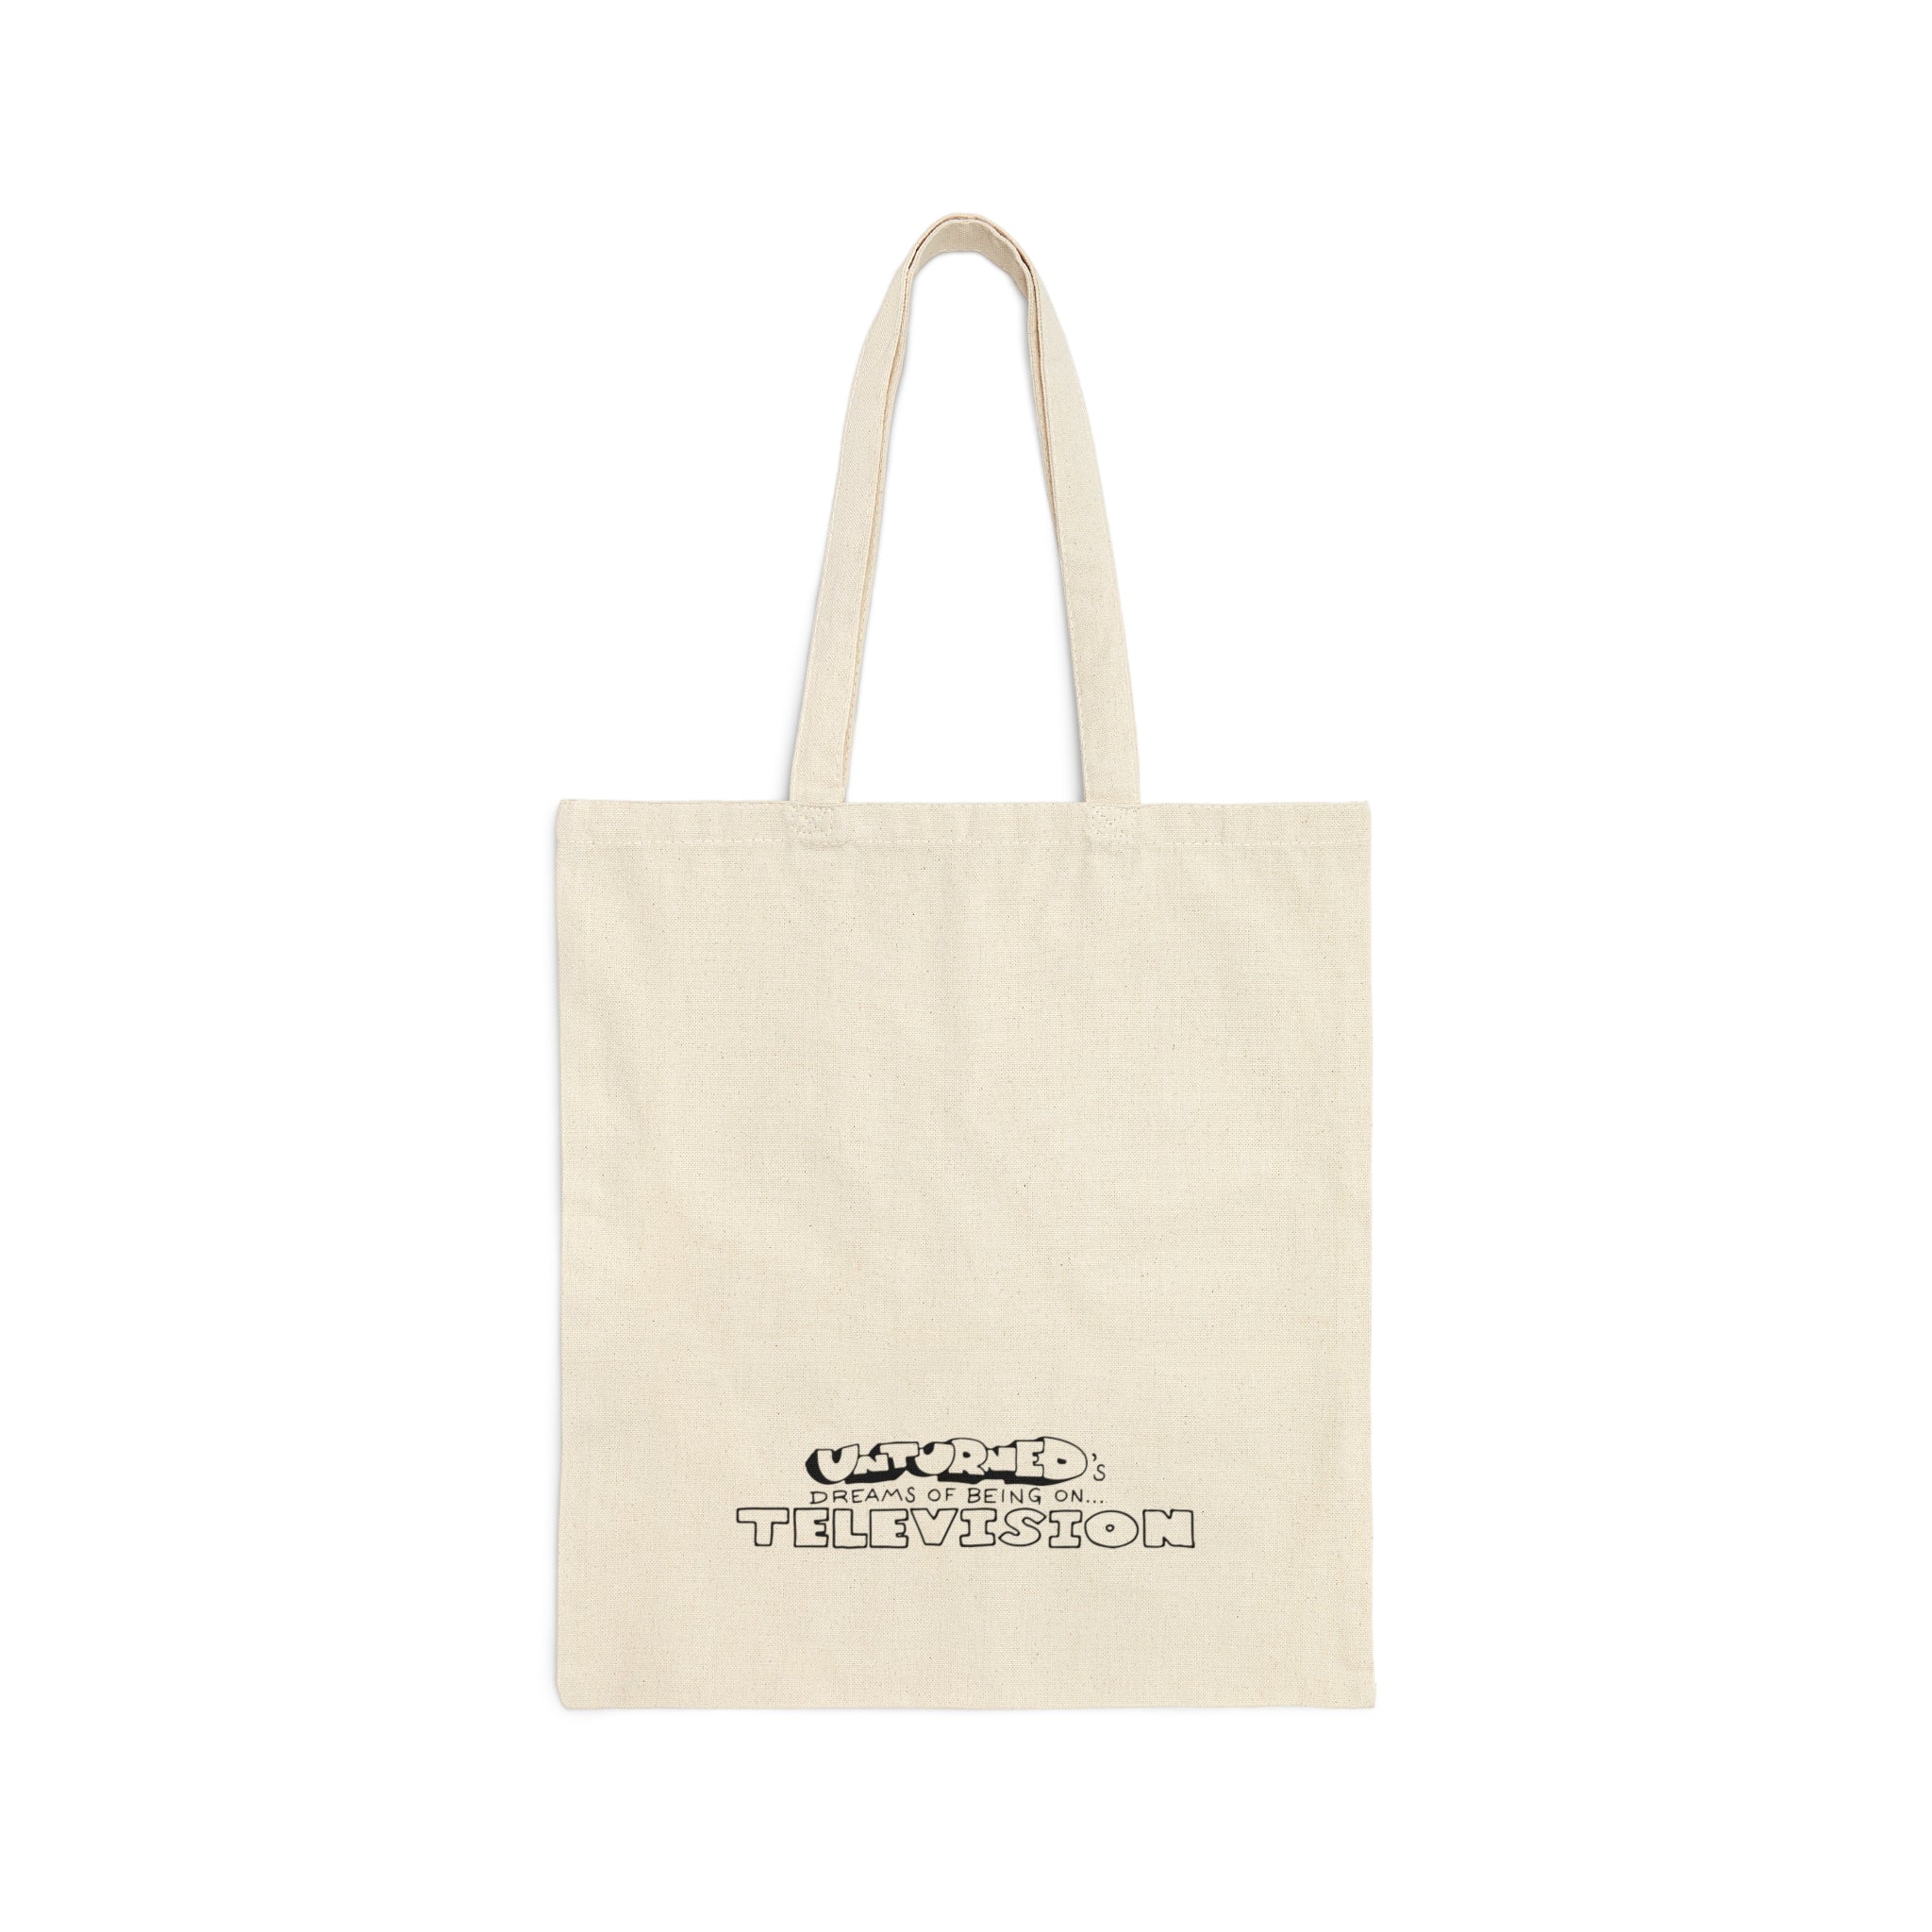 Dreams of Being on Television Canvas Tote Bag